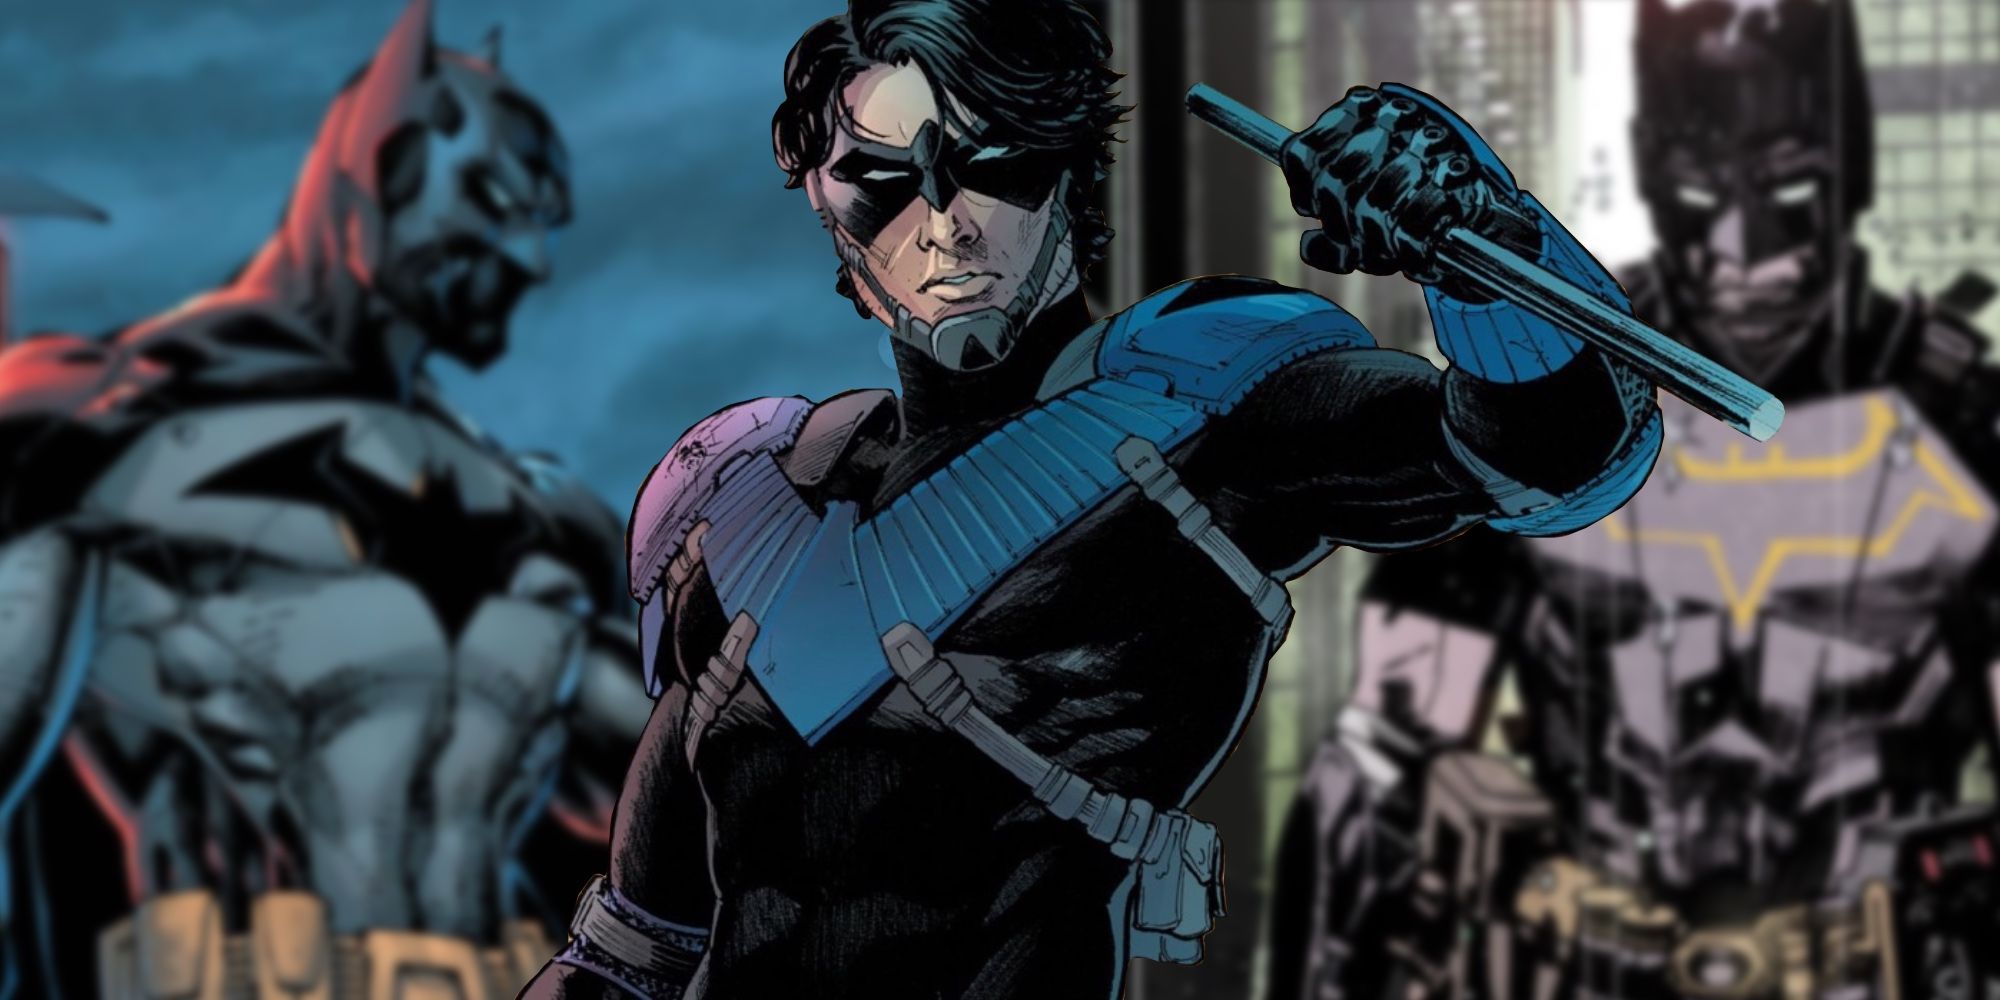 Nightwing Launches A New Battle for Batman's Cowl in DC's Future